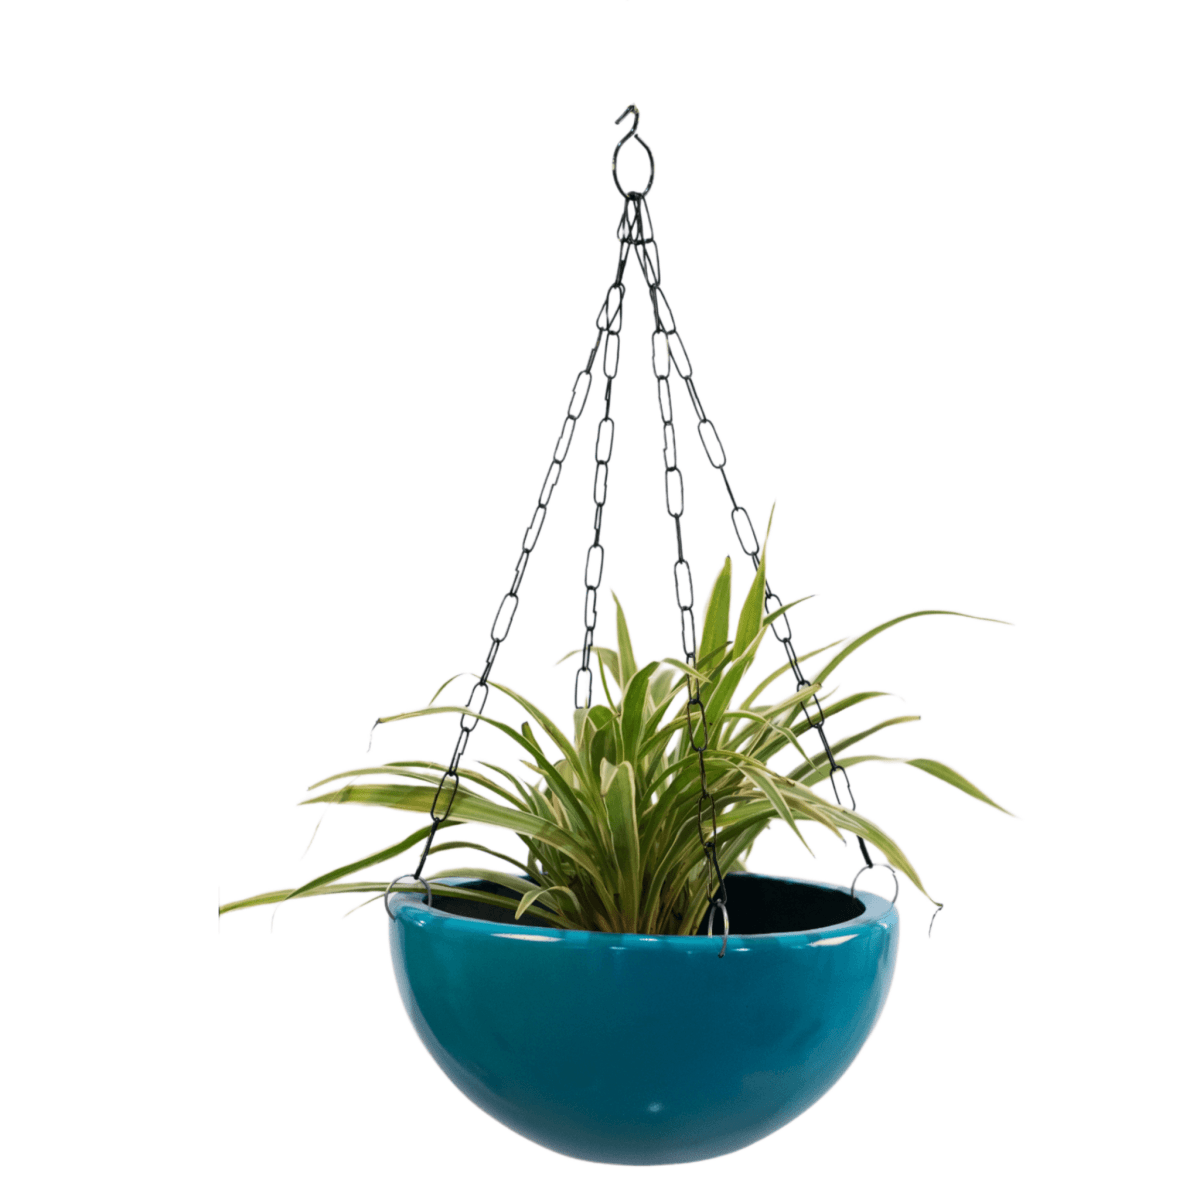 Kezevel Indoor Outdoor FRP Planters - Lightweight Durable Glossy Turquoise Blue Finish Flower Pot , Hanging Planter Decor